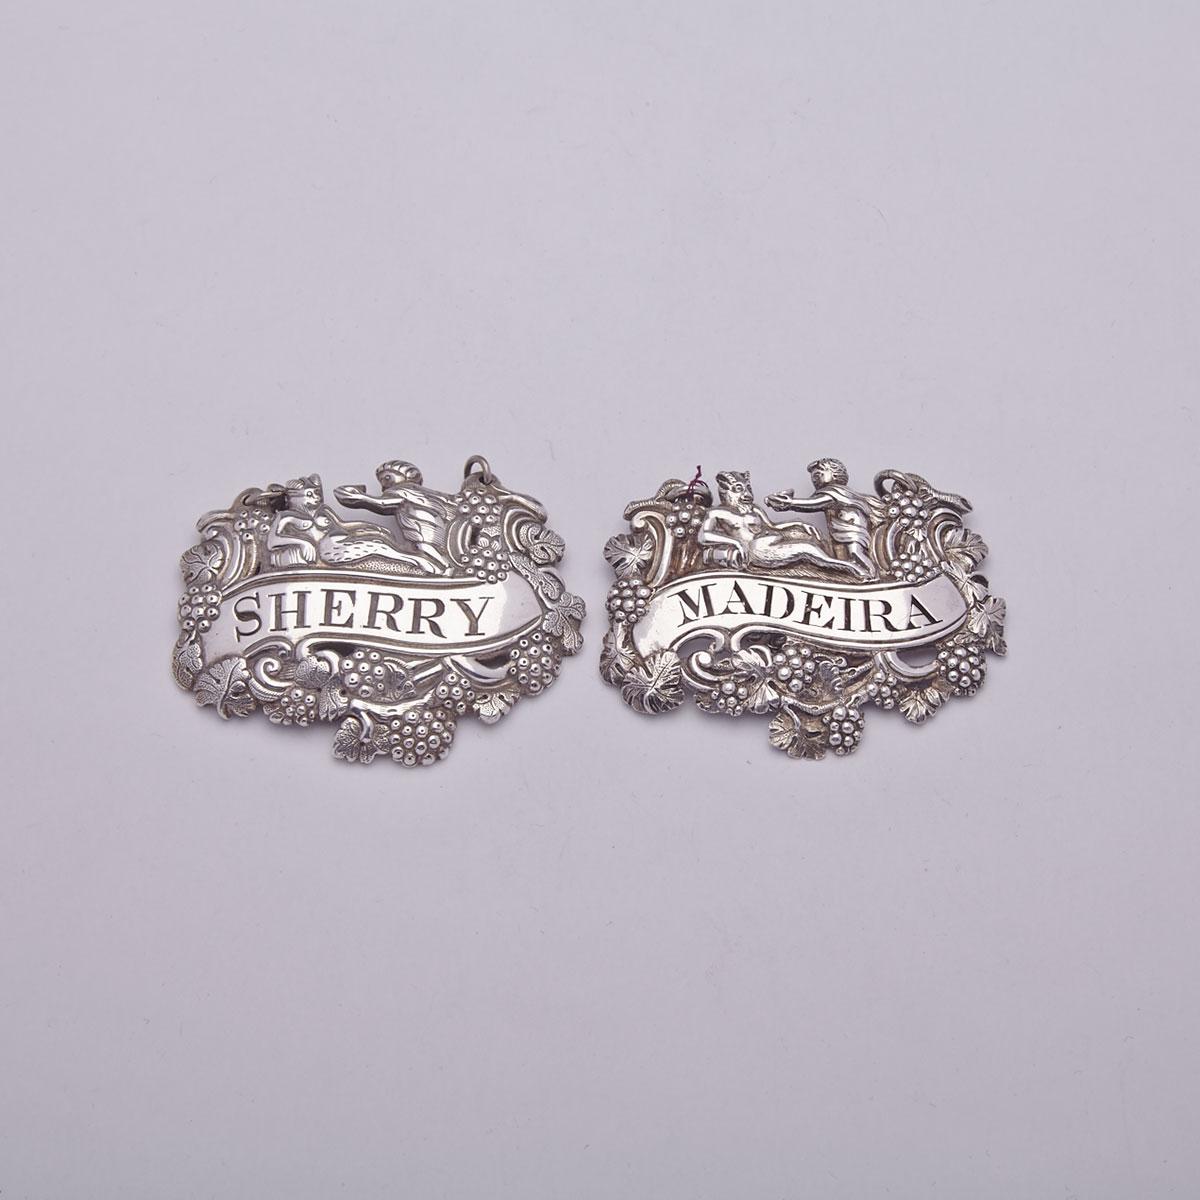 Two Georgian Silver Wine Labels, one John Reily, London, 1814, the other unmarked, c.1820